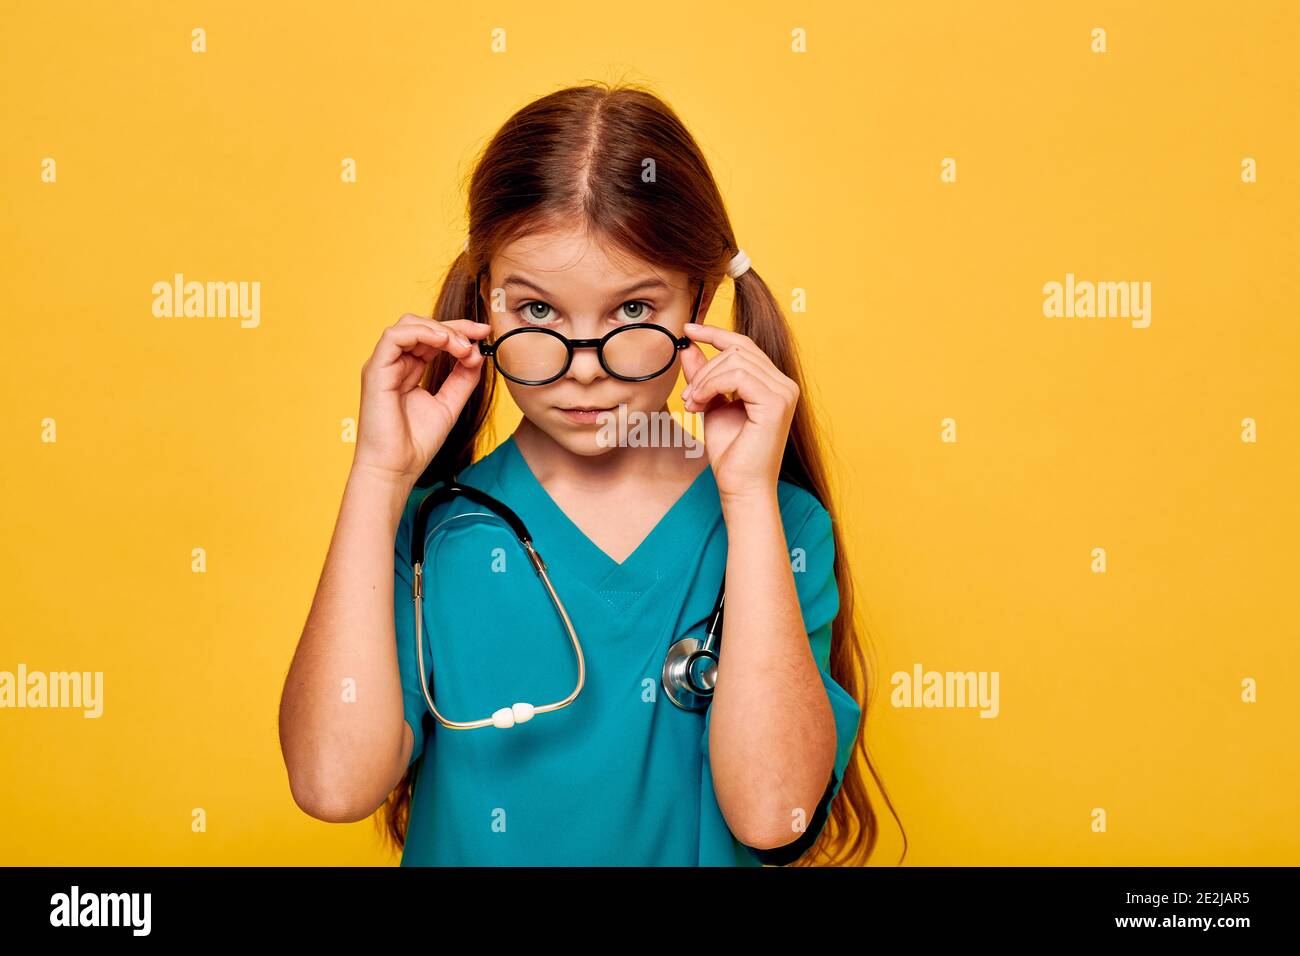 Girl wearing a blue medical outfit and a stethoscope, future doctor, and shows on her face serious emotion, looking from under glasses Stock Photo